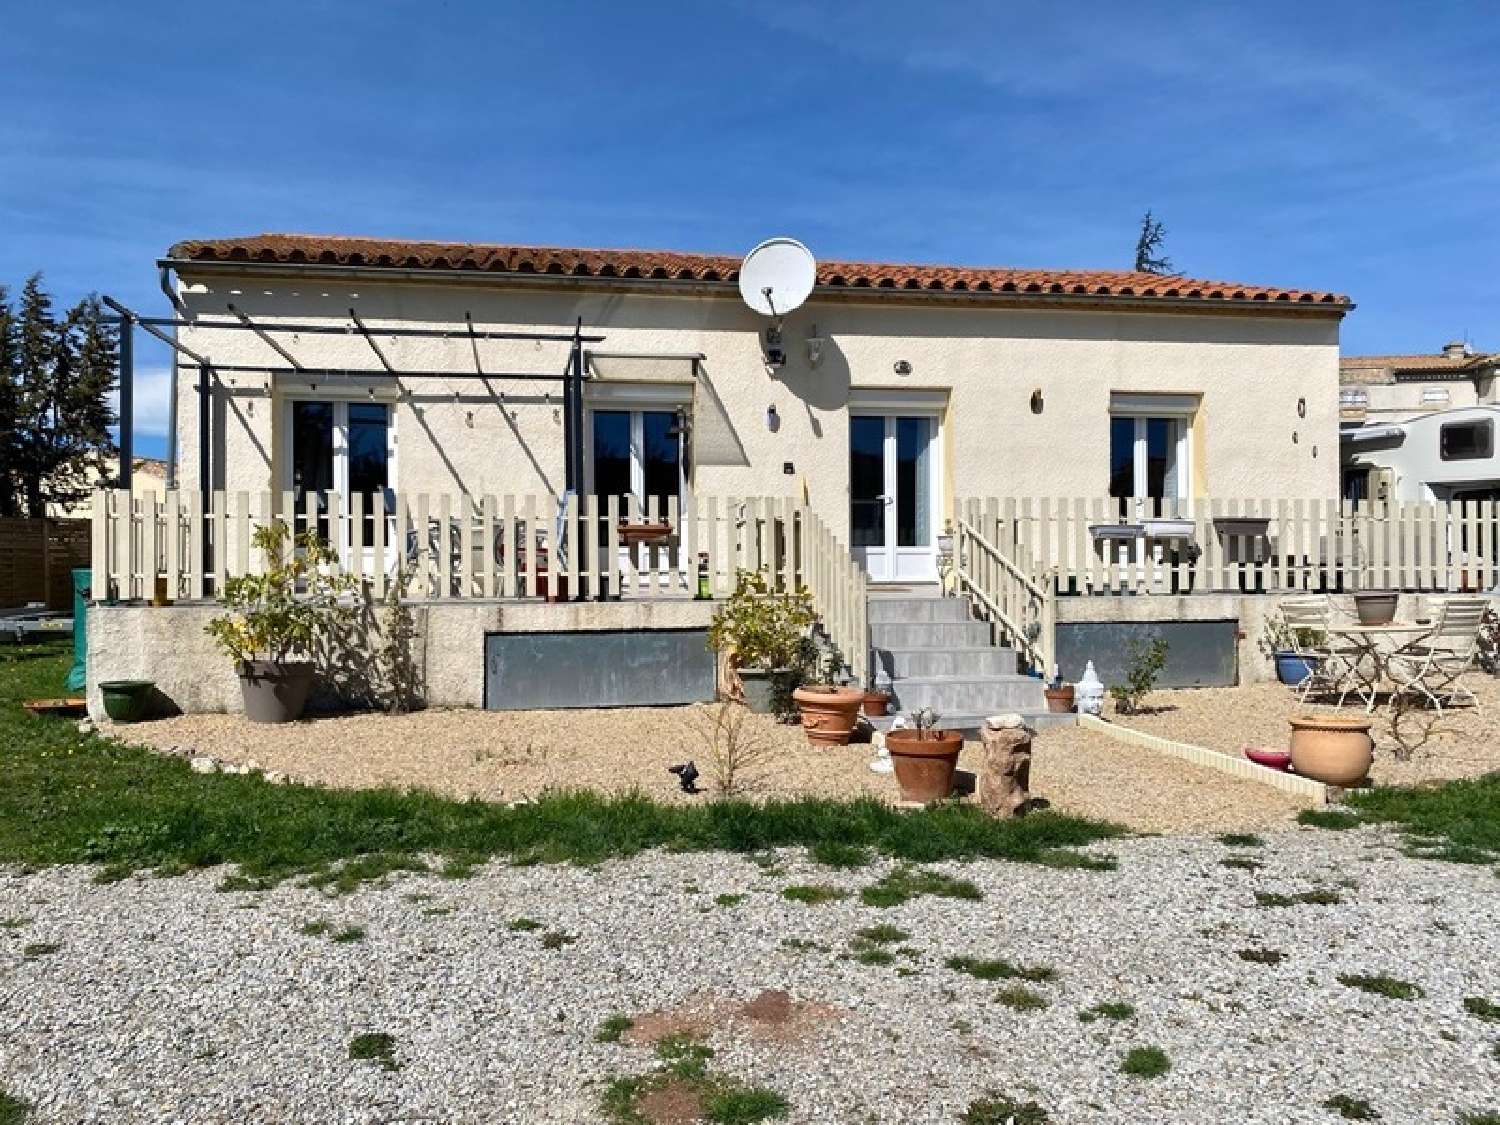  for sale house Mouthoumet Aude 1